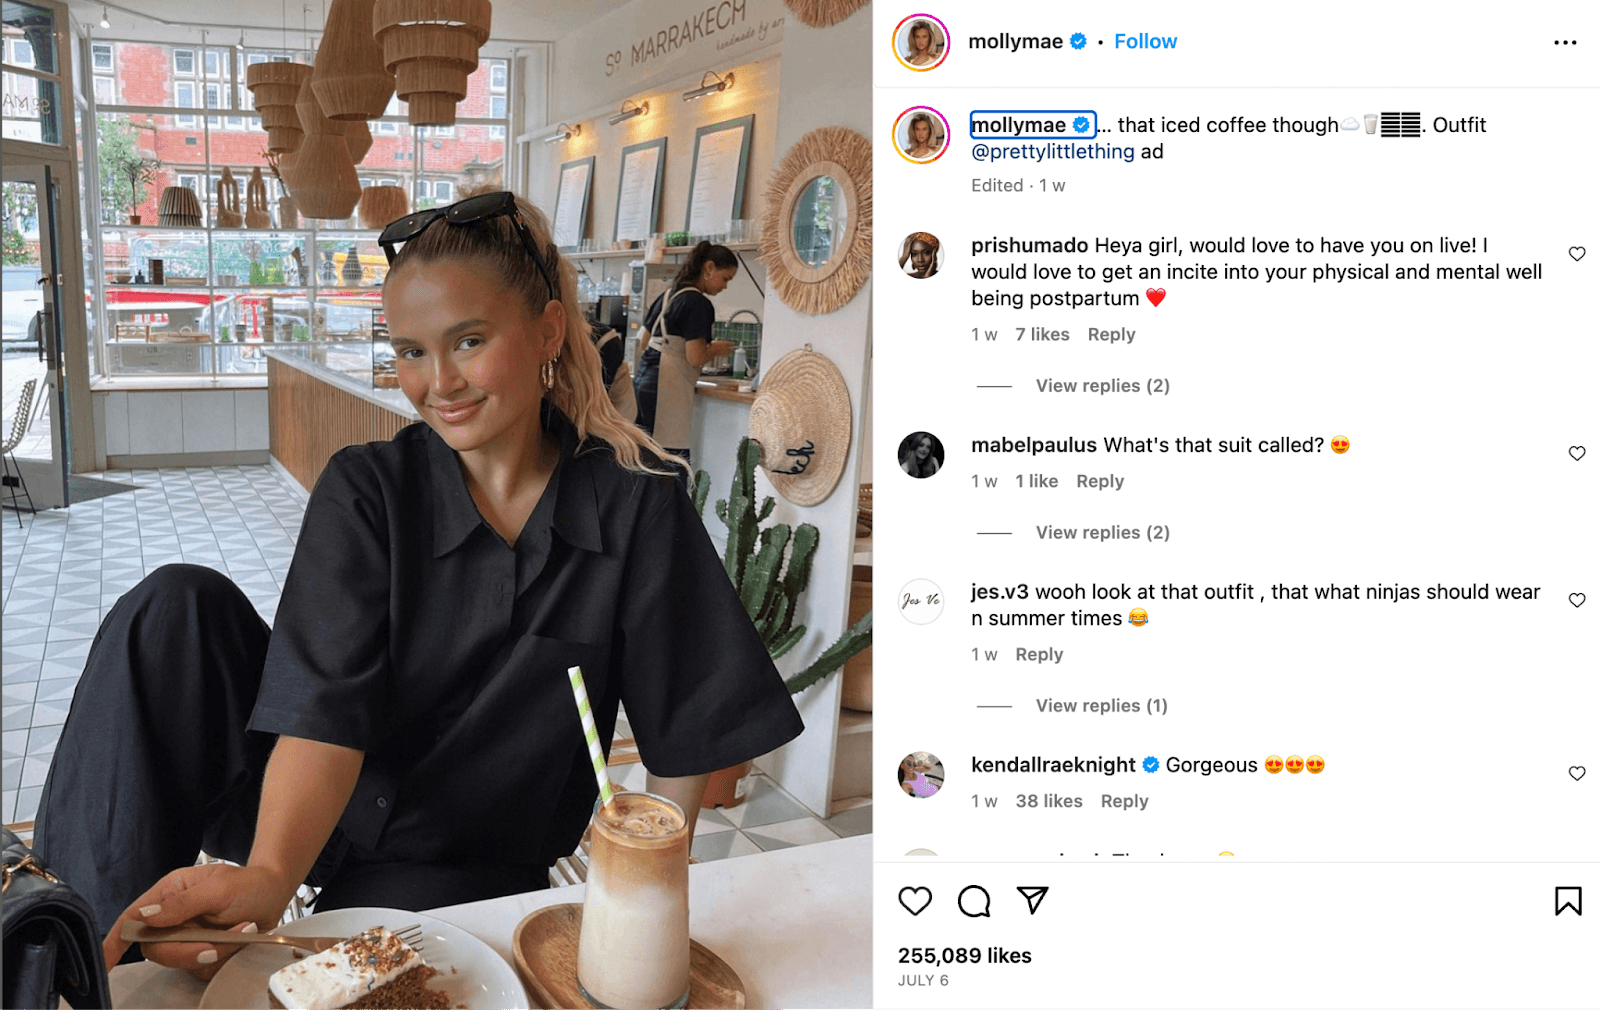 Instagram influencer post of a woman sat in a coffee shop drinking an iced coffee, wearing a black jumpsuit and promoting where she bought her outfit from.